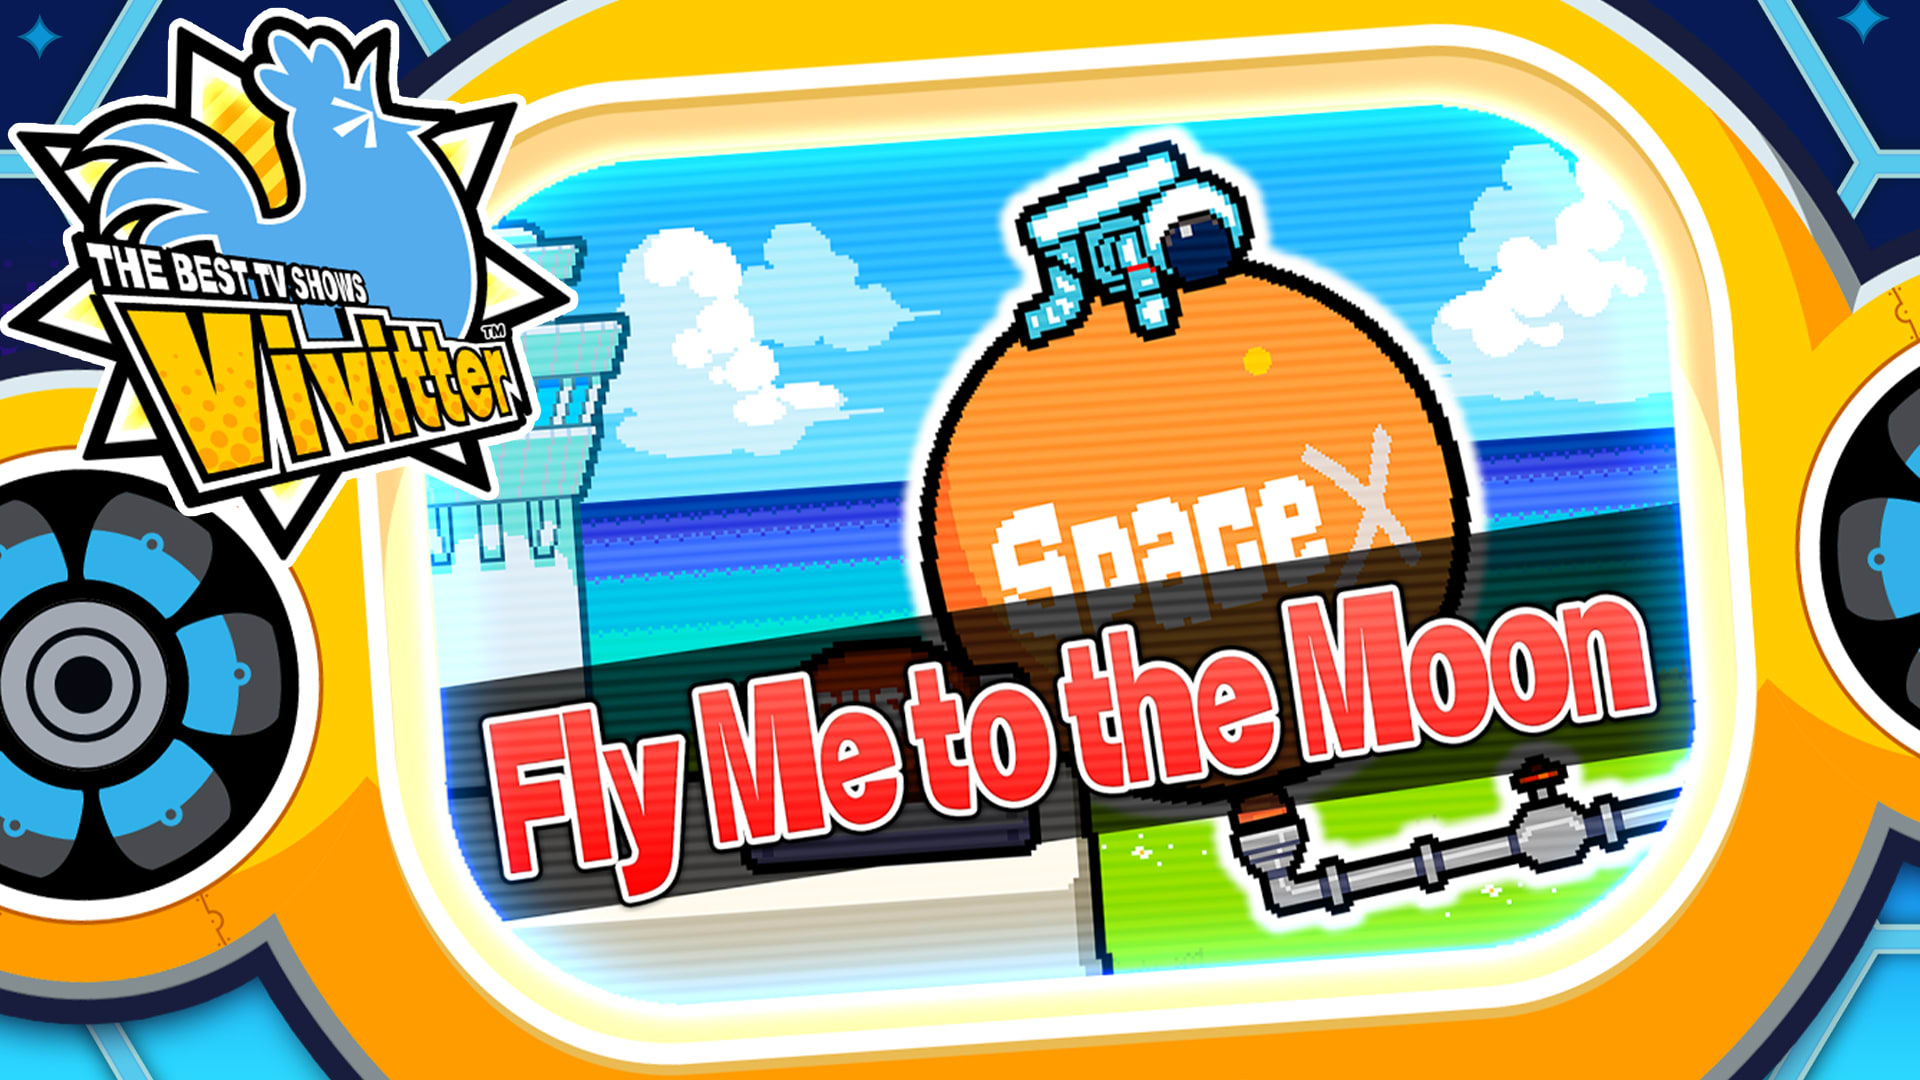 Additional mini-game "Fly Me to the Moon"